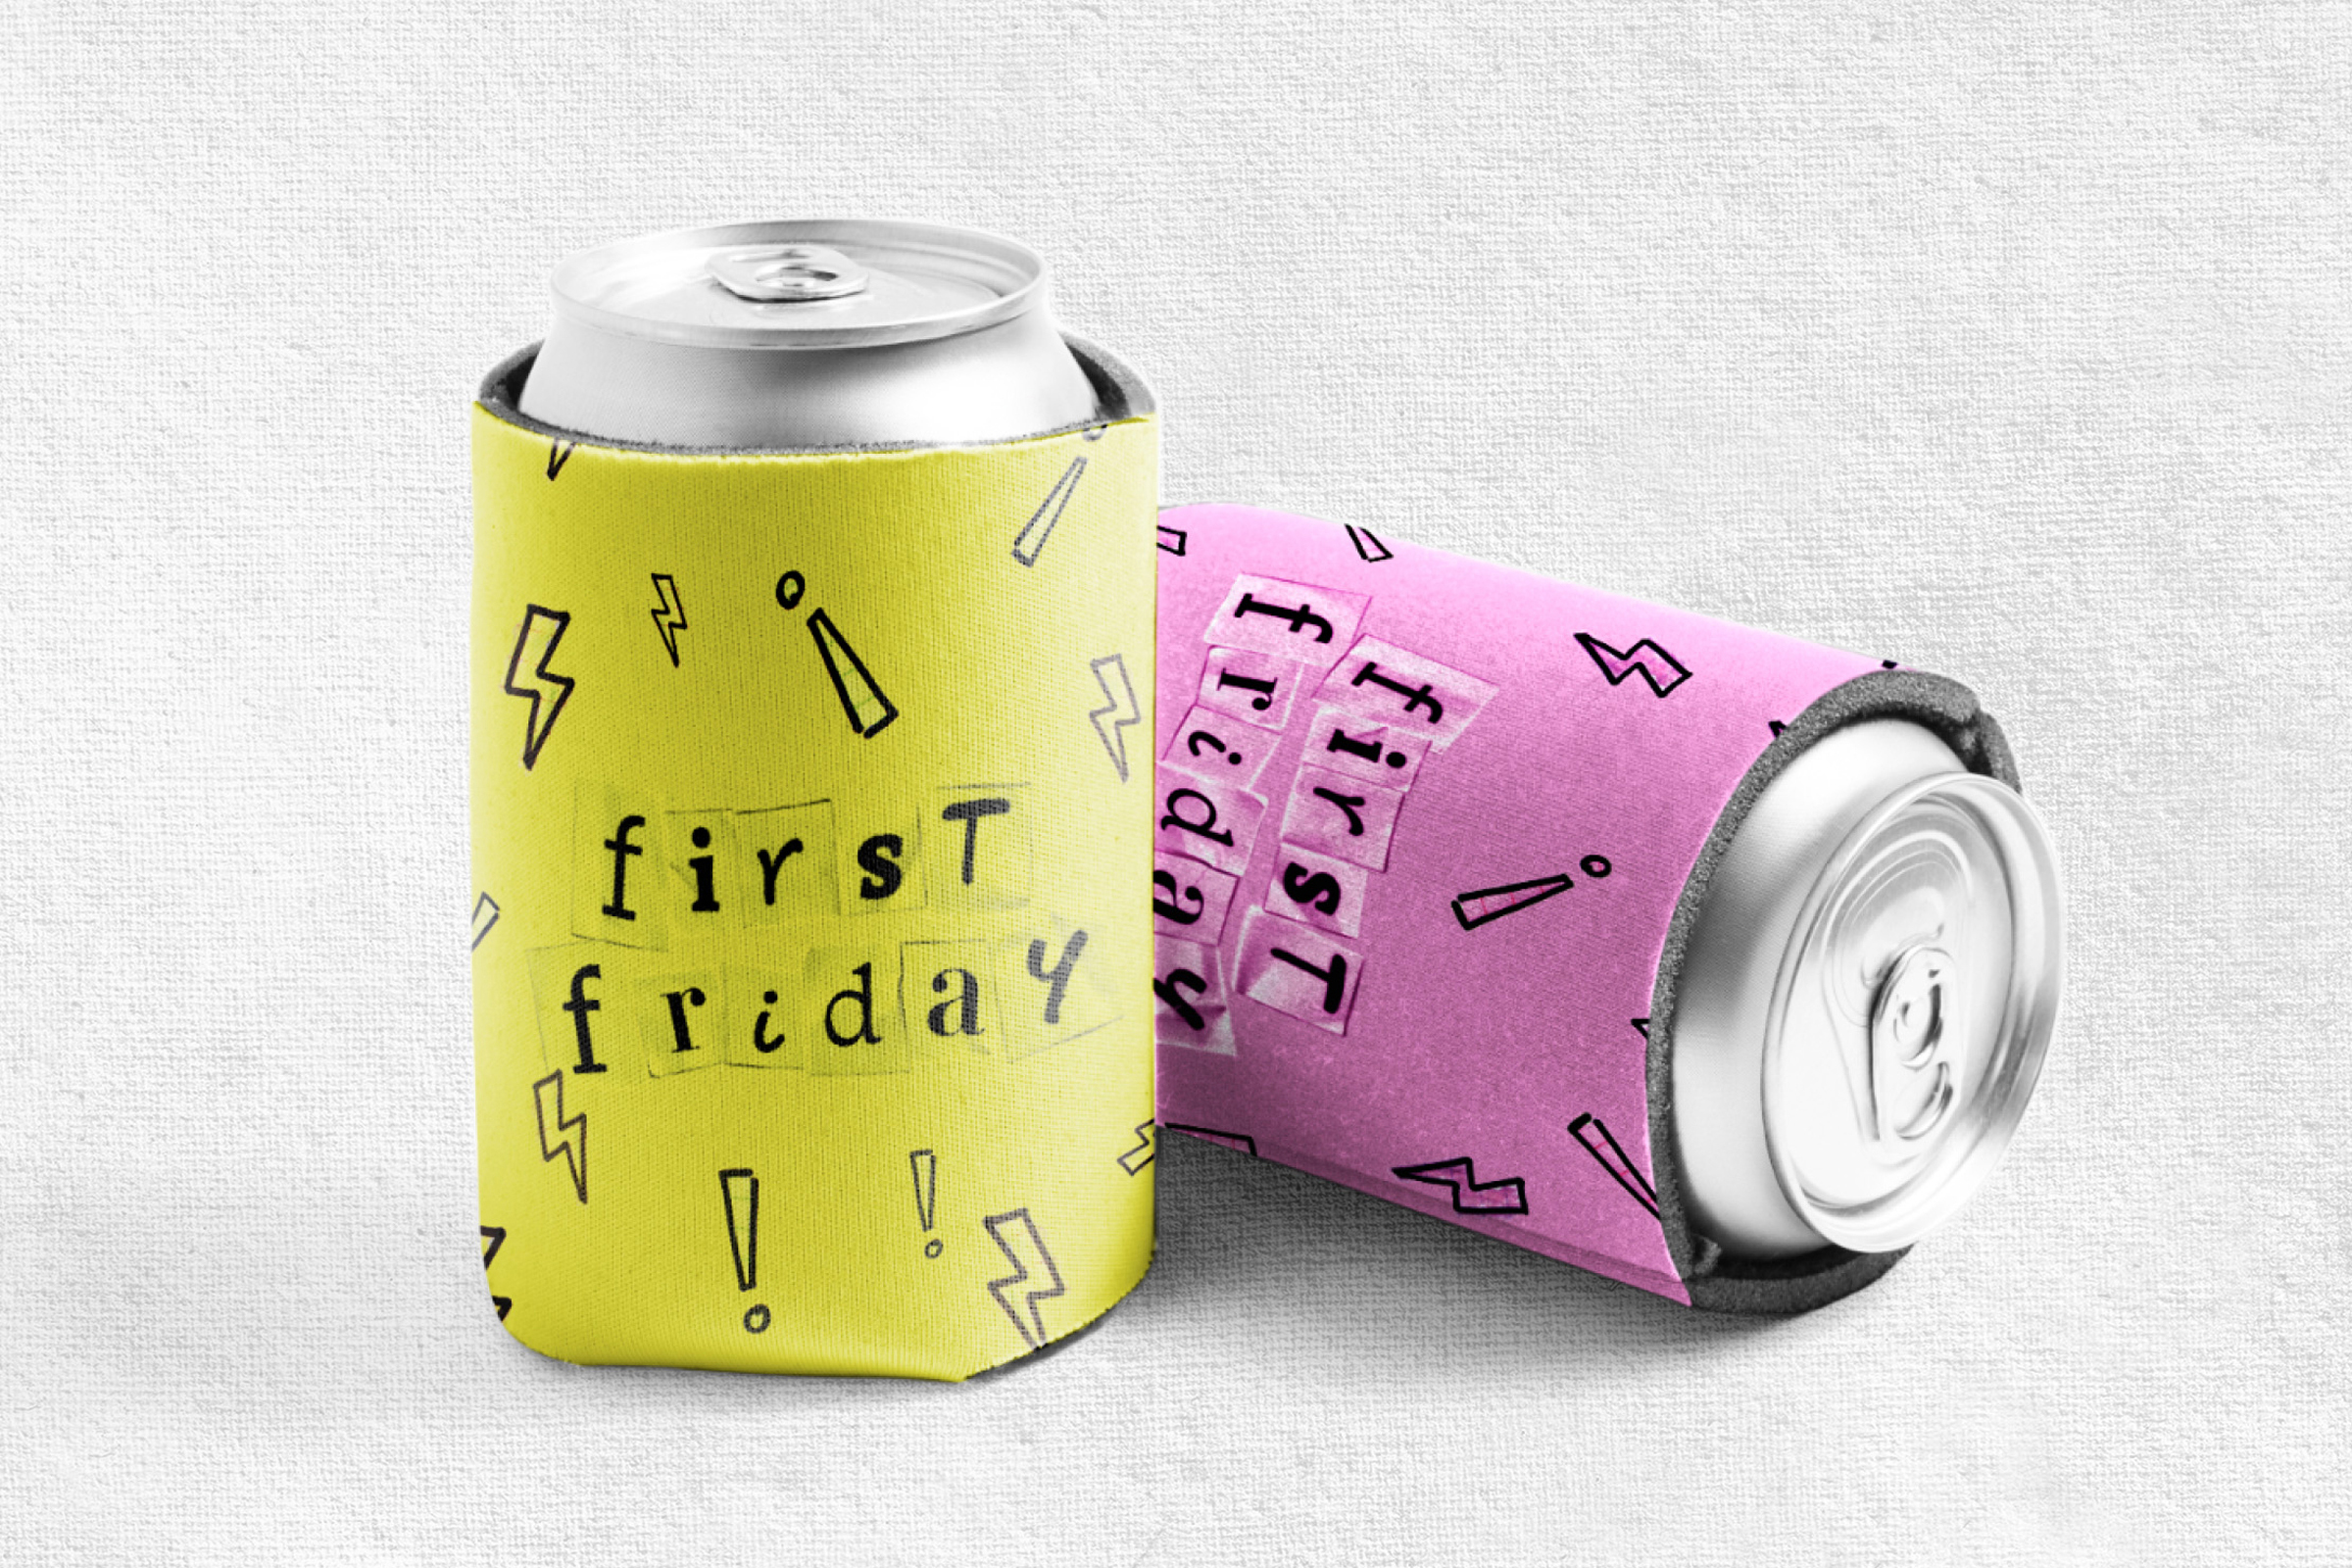 Photo of pink and yellow koozies with First Friday logo